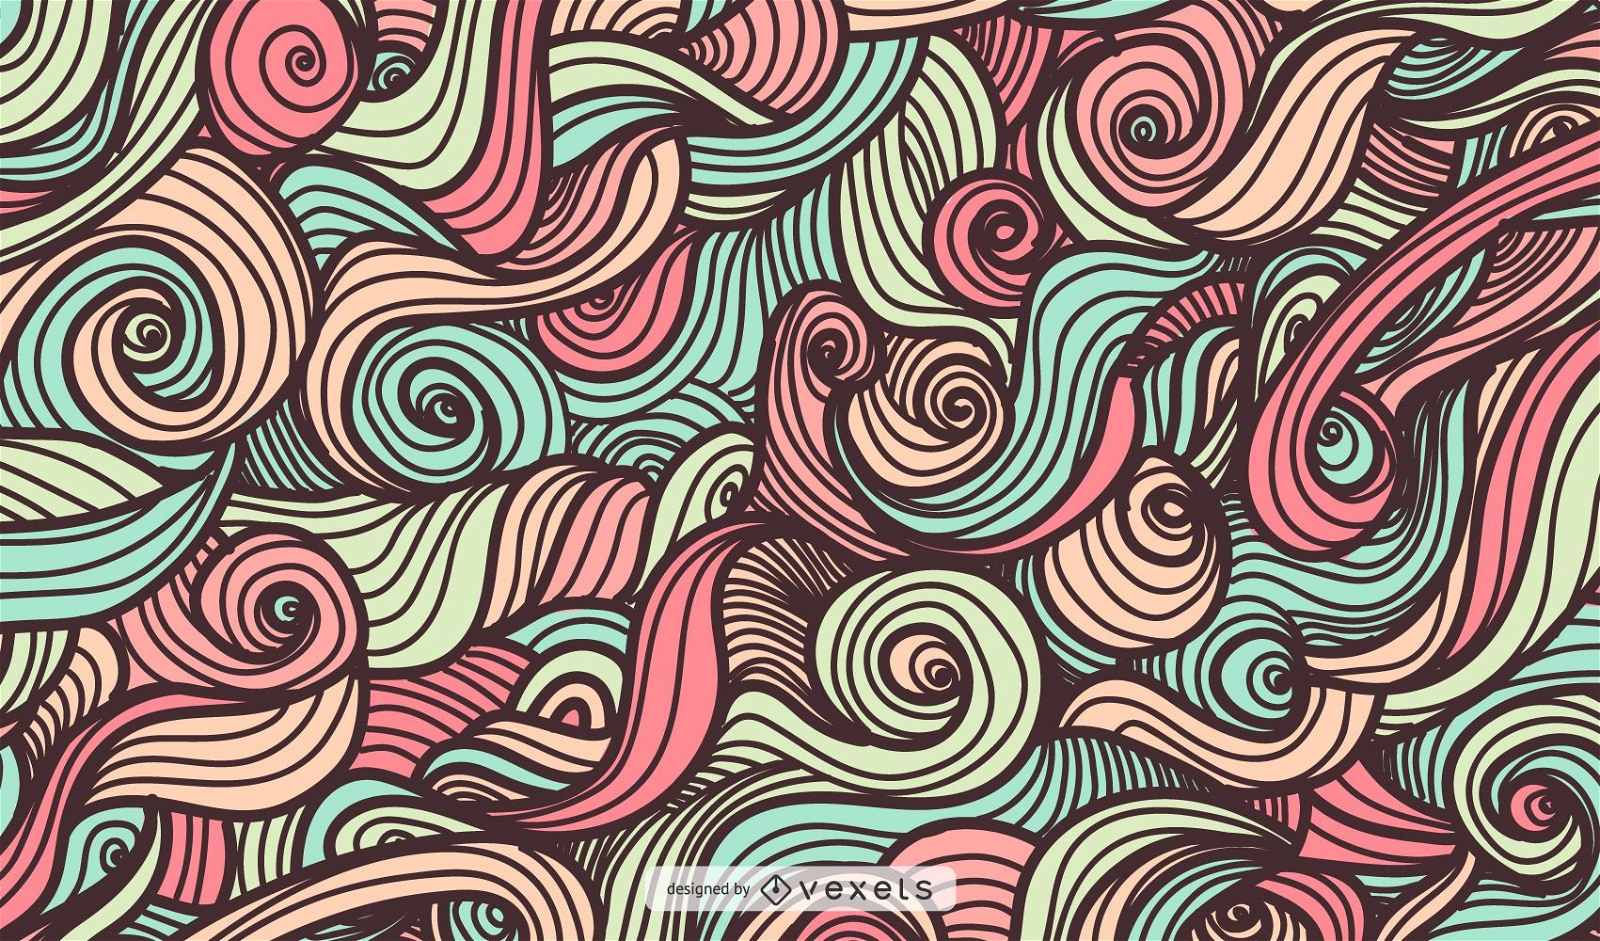 Waves with colored swirls